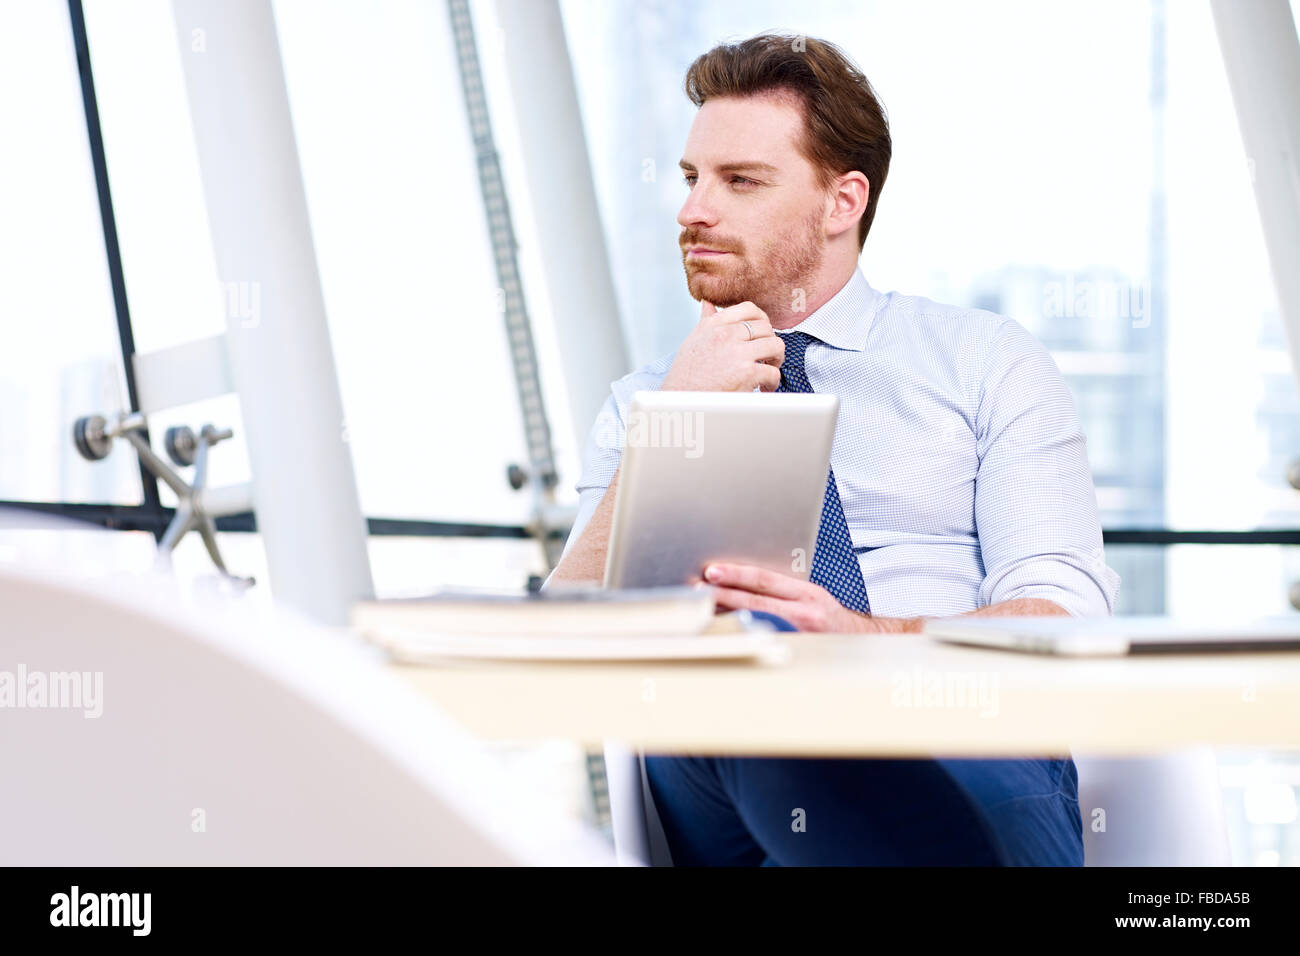 business executive sitting in office thinking Stock Photo